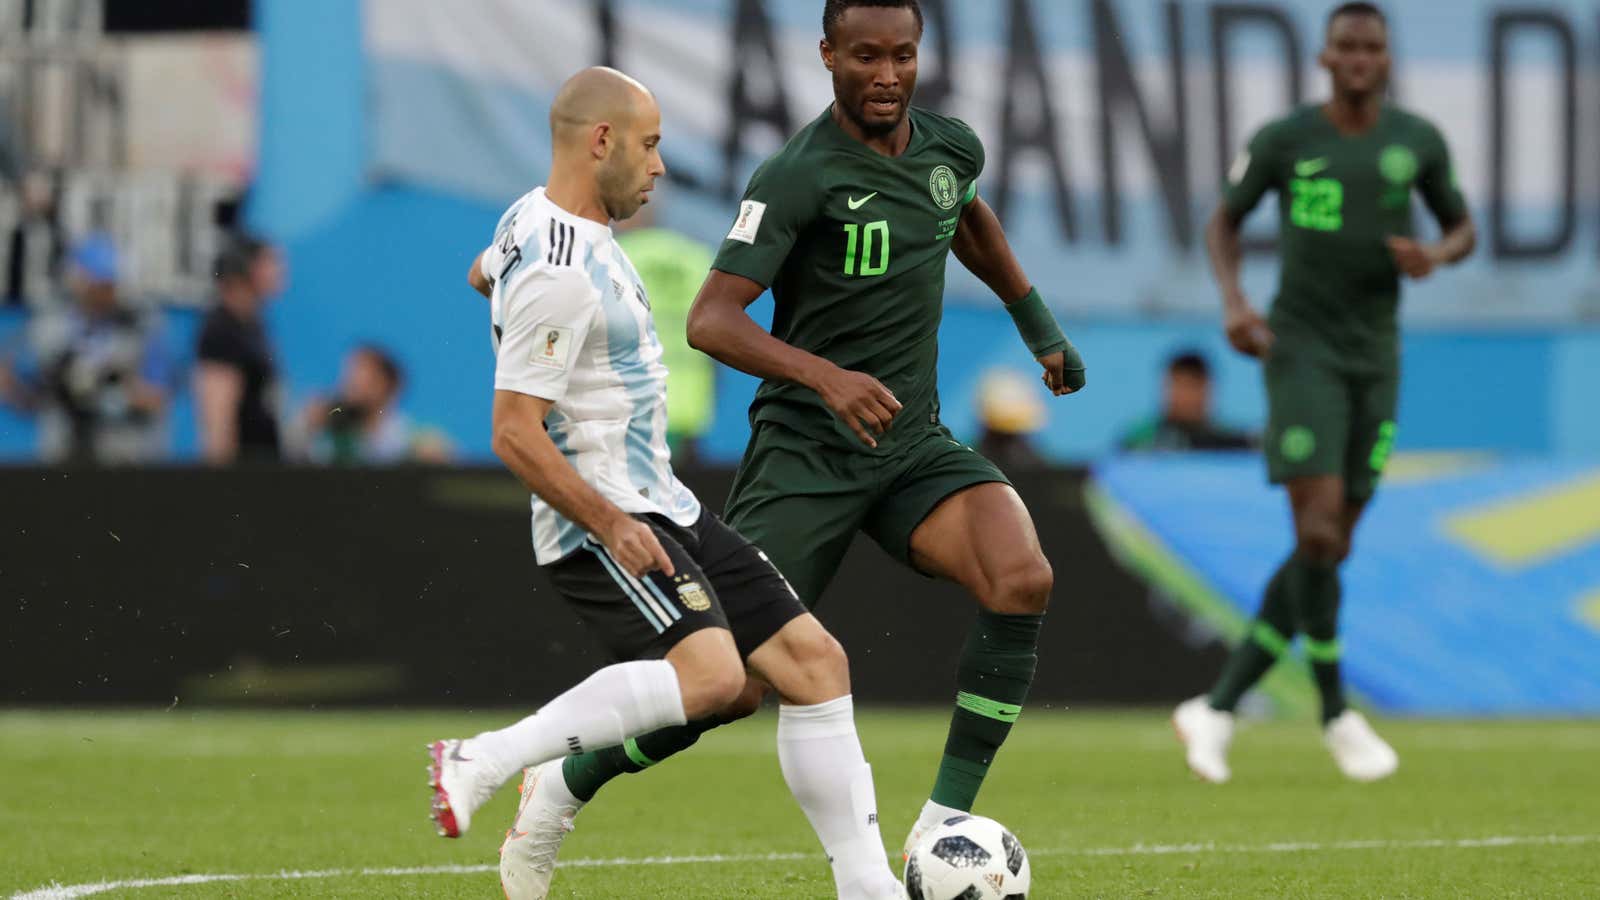 John Obi Mikel in action against Argentina at the World Cup.